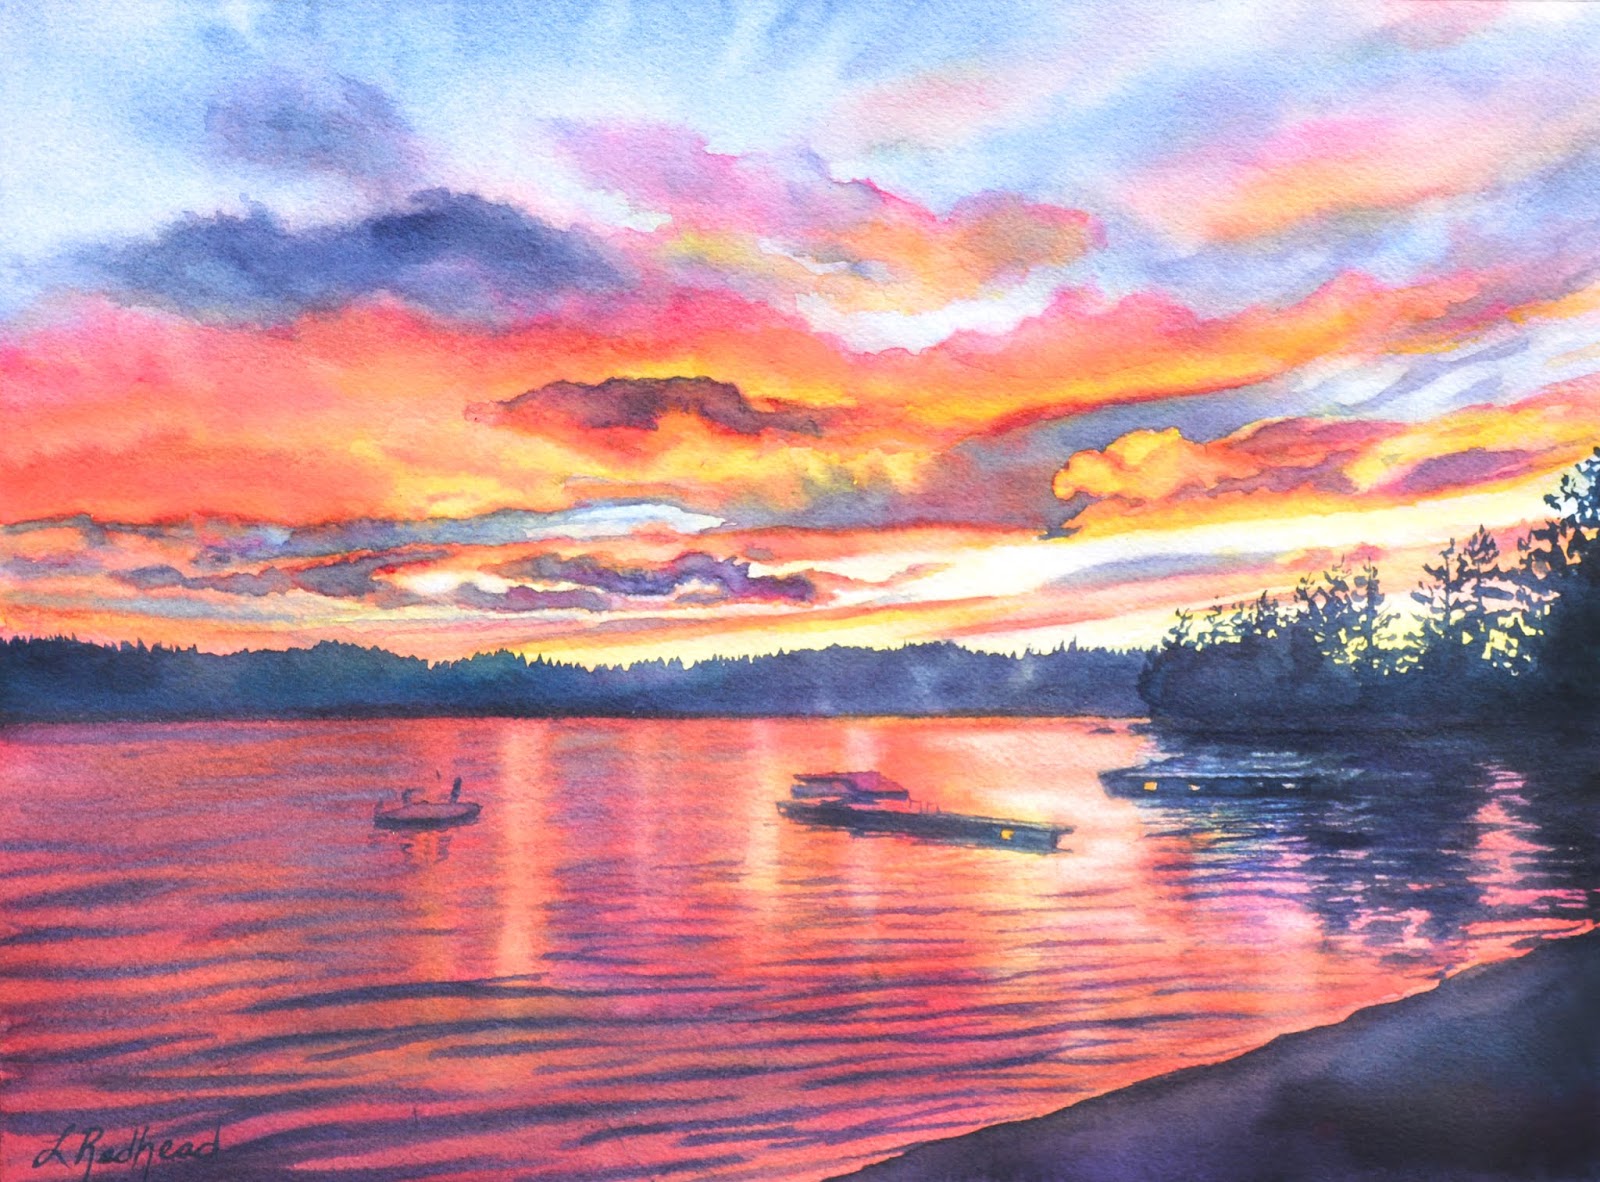 Sunset over water painting,beautiful sunset over the water painting -clear ...